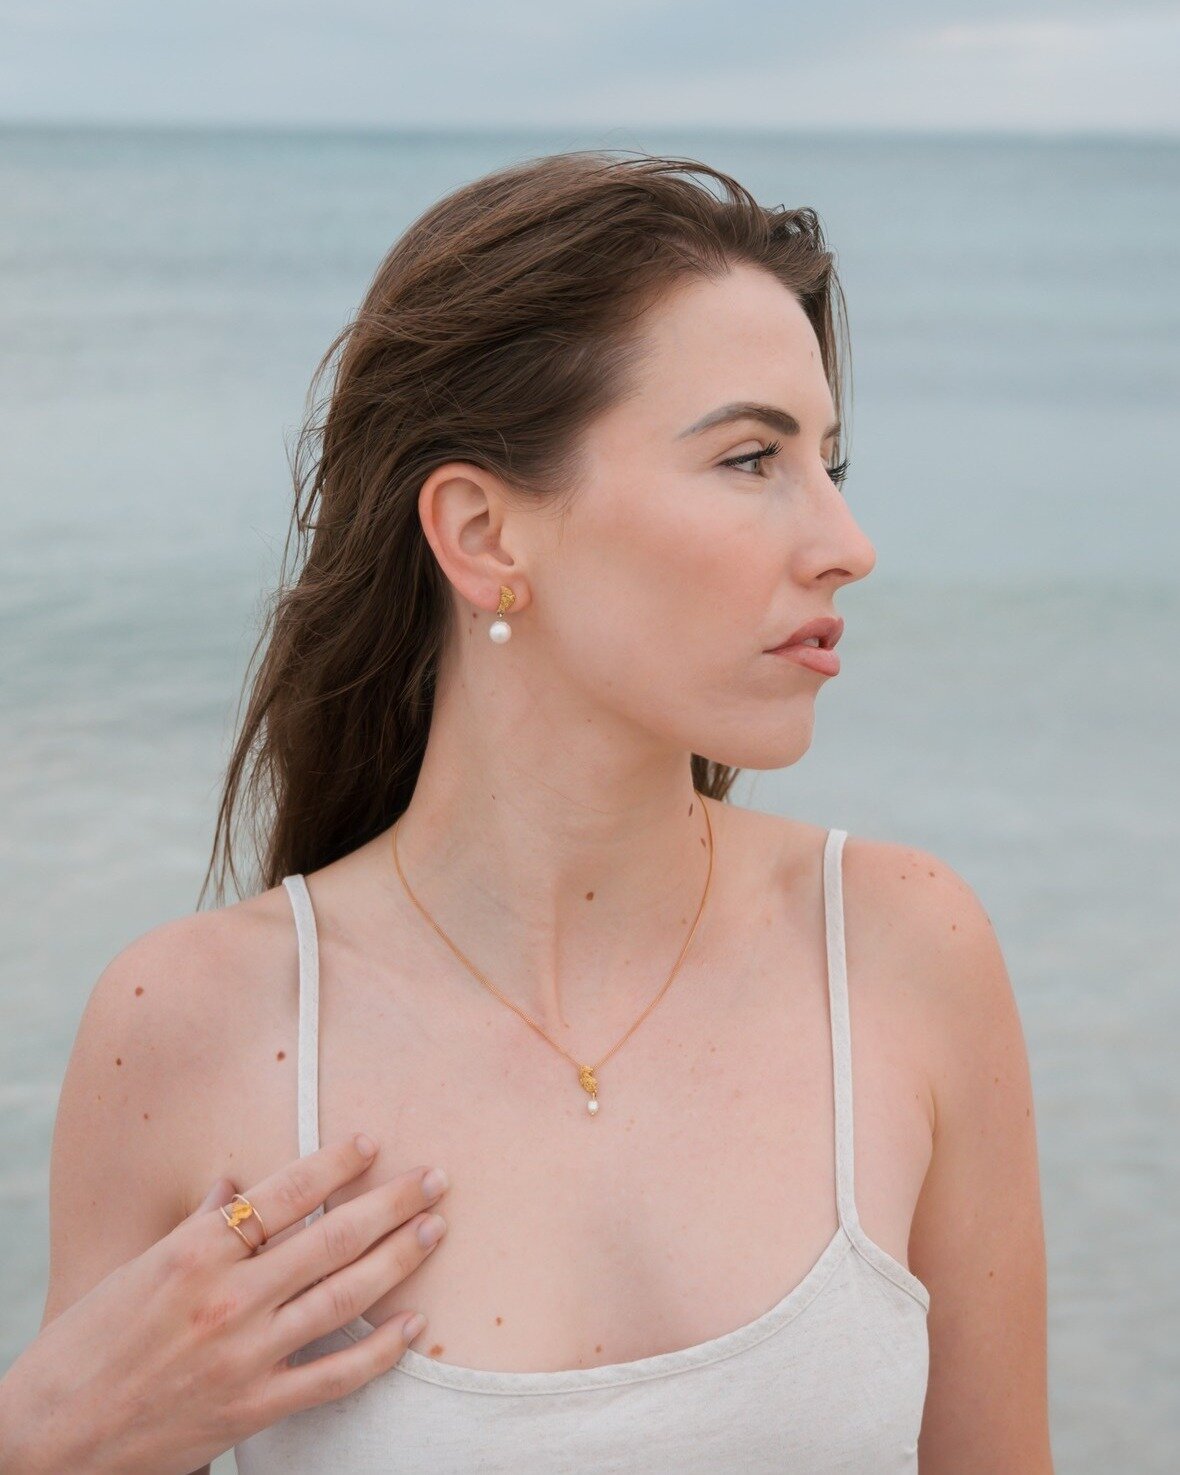 ✨ Introducing the Coastal Elegance Collection ✨ Immerse yourself in the allure of our latest creation, where the land meets the sea in perfect harmony. 🌊💫

Every piece in this collection is adorned with locally sourced gold nuggets and pearls, hand